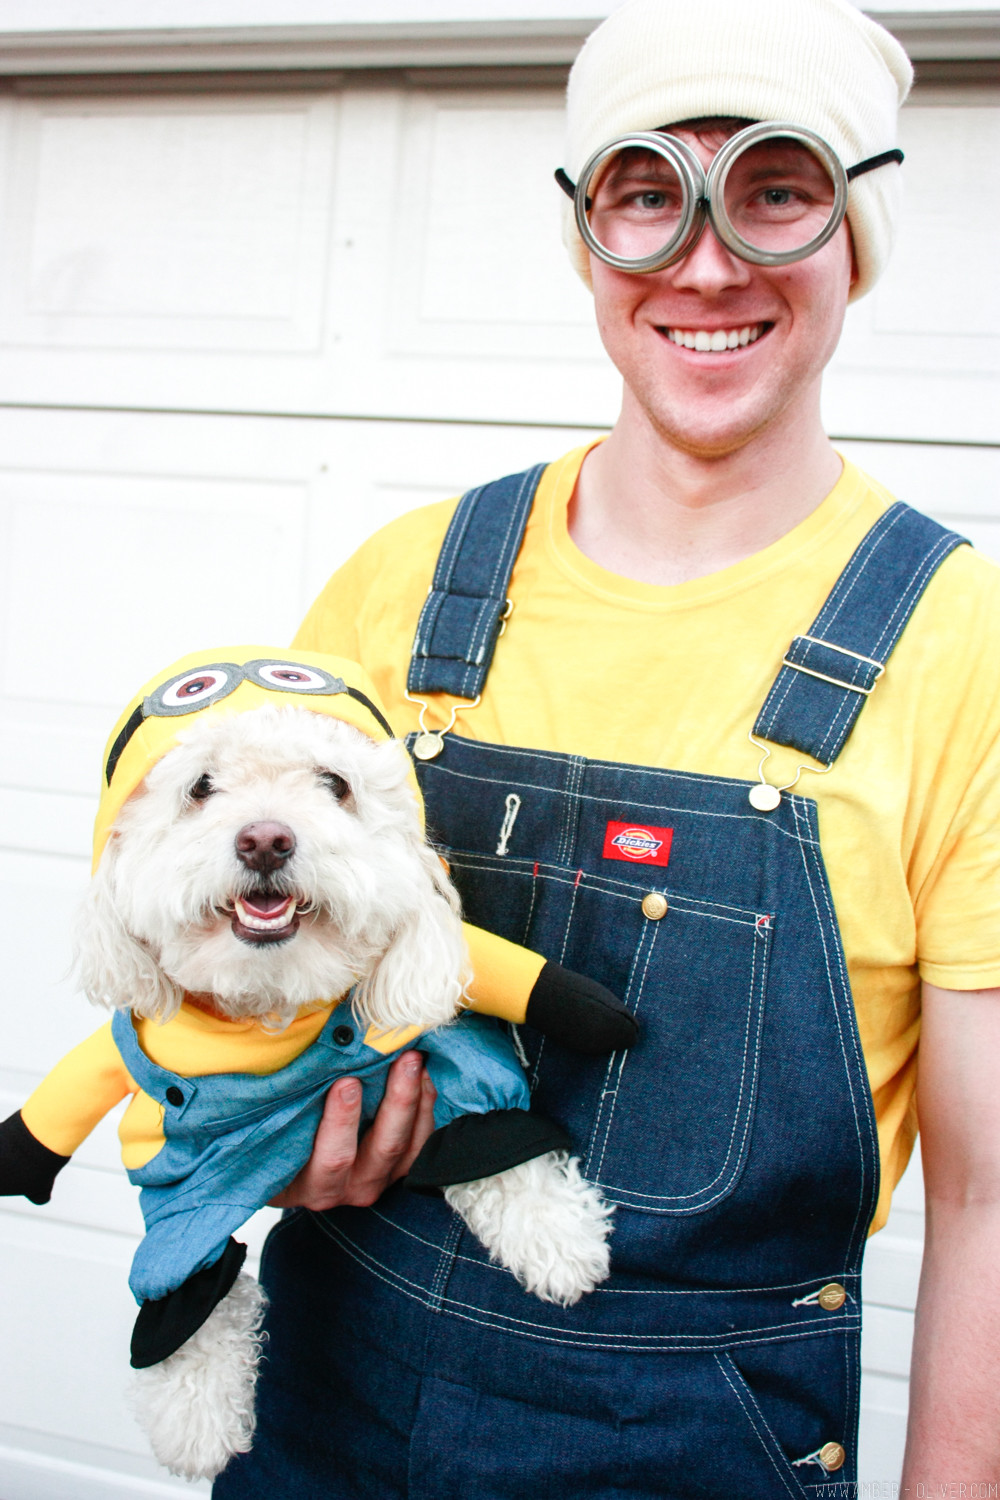 DIY Minion Costume Without Overalls
 DIY Minion Costume Make your own Minion Halloween costumes